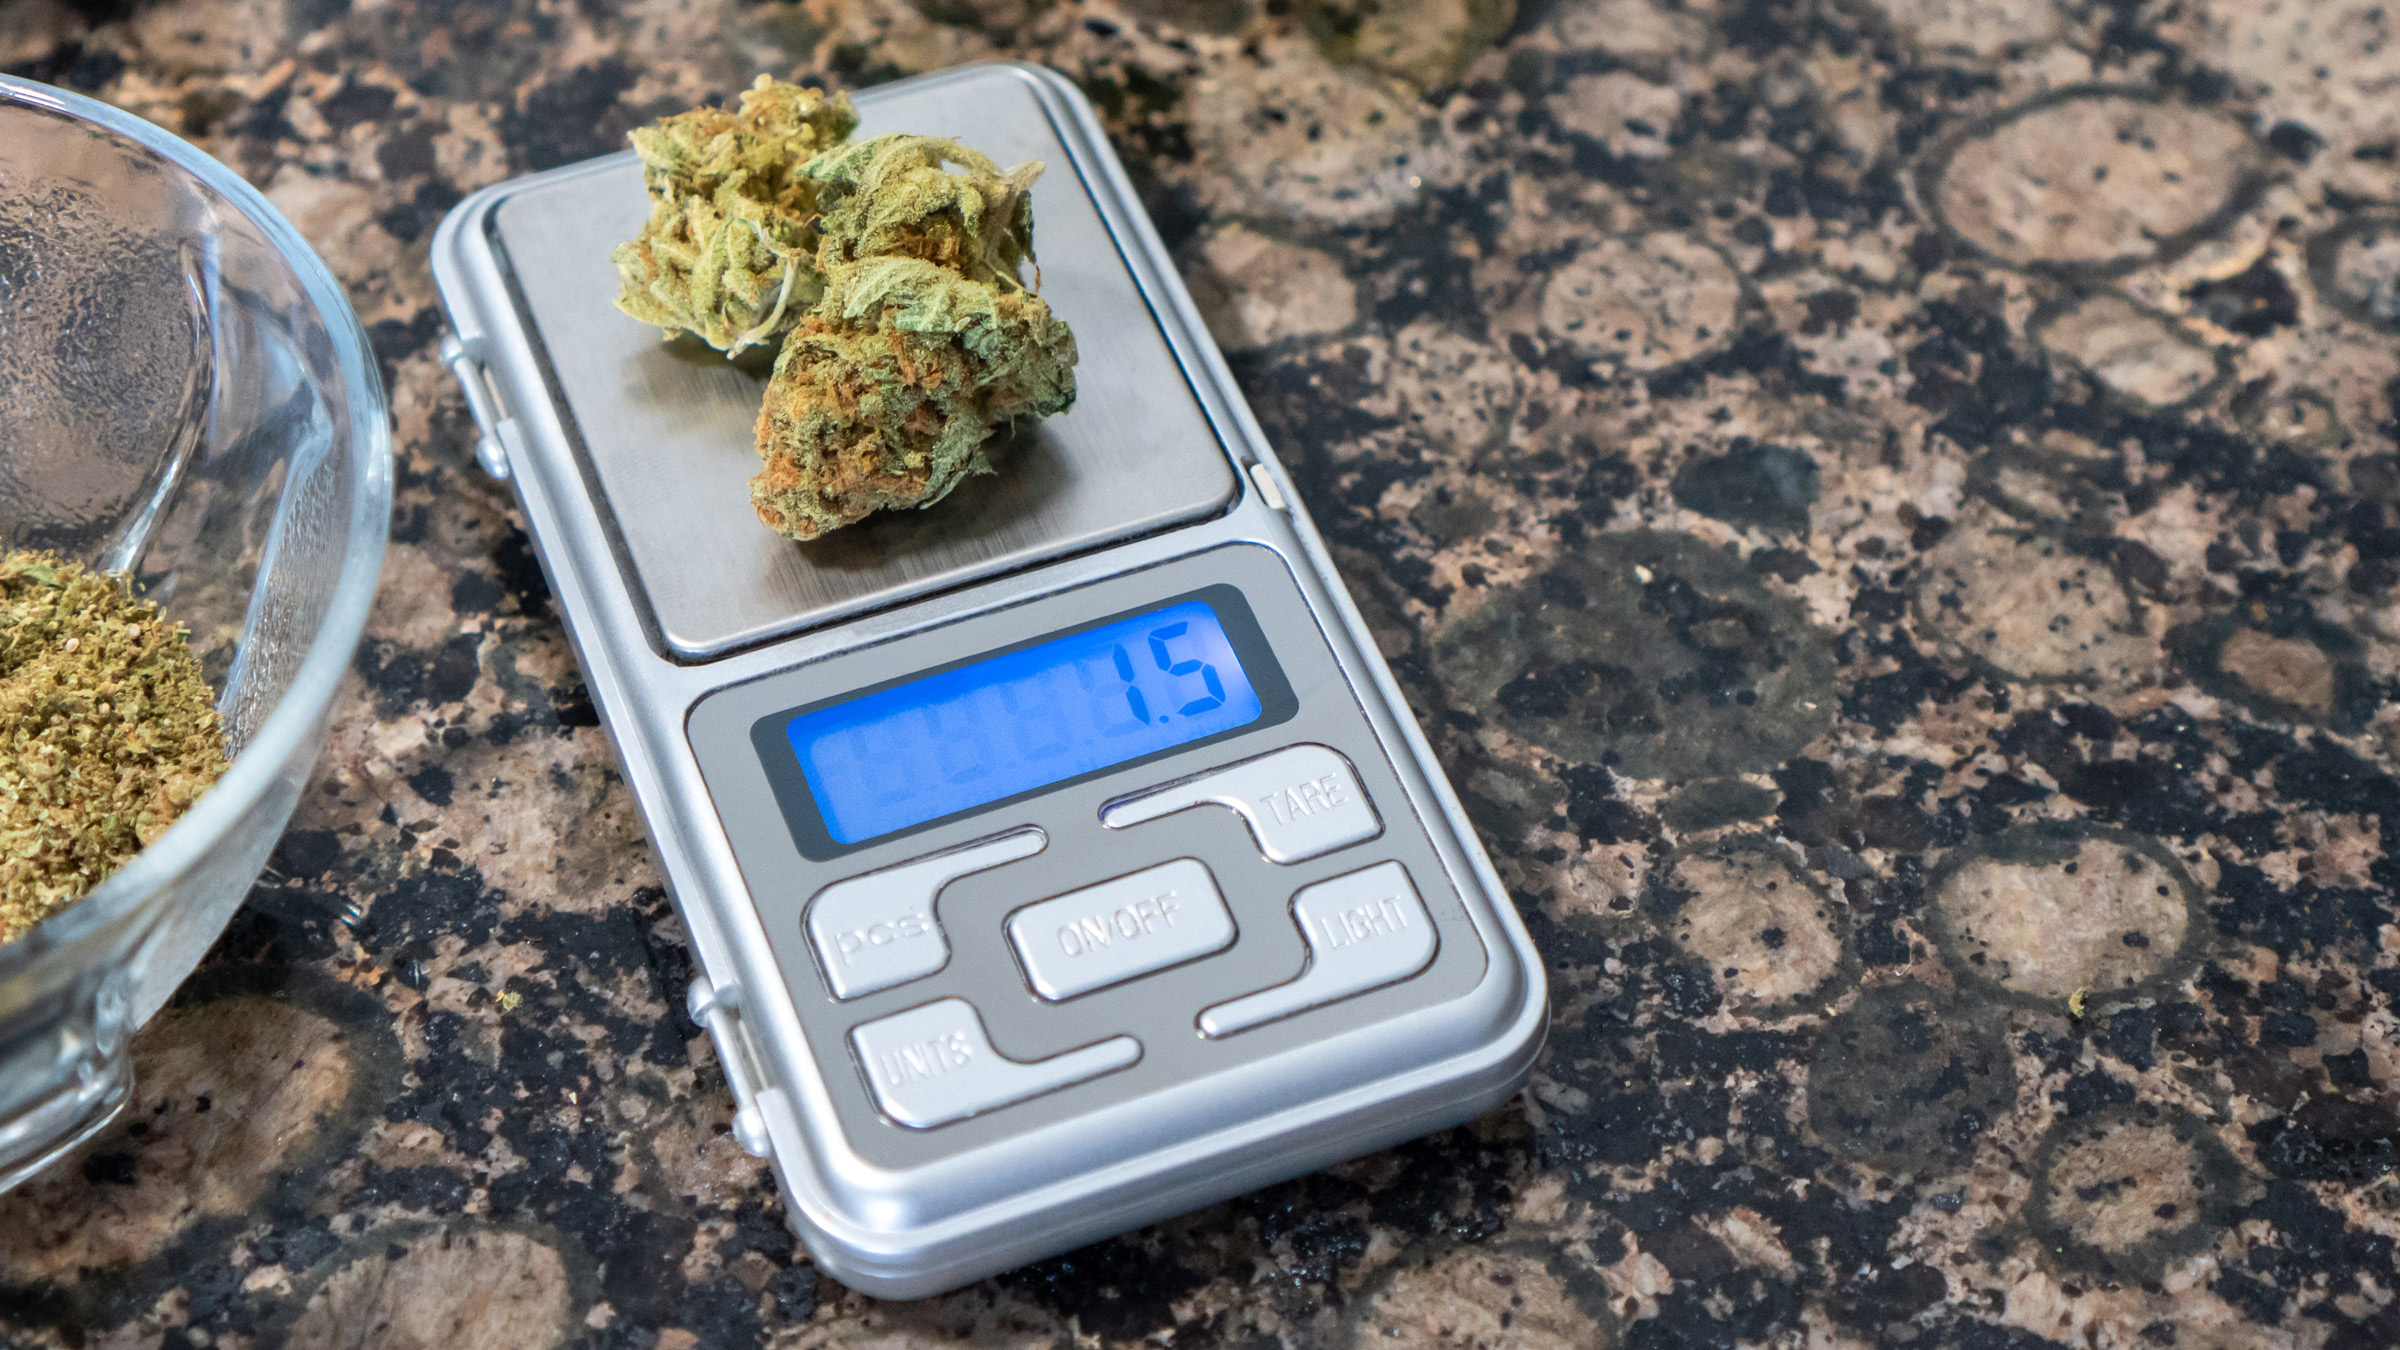 How Can You Weigh or Measure Your Cannabis Without a Scale?